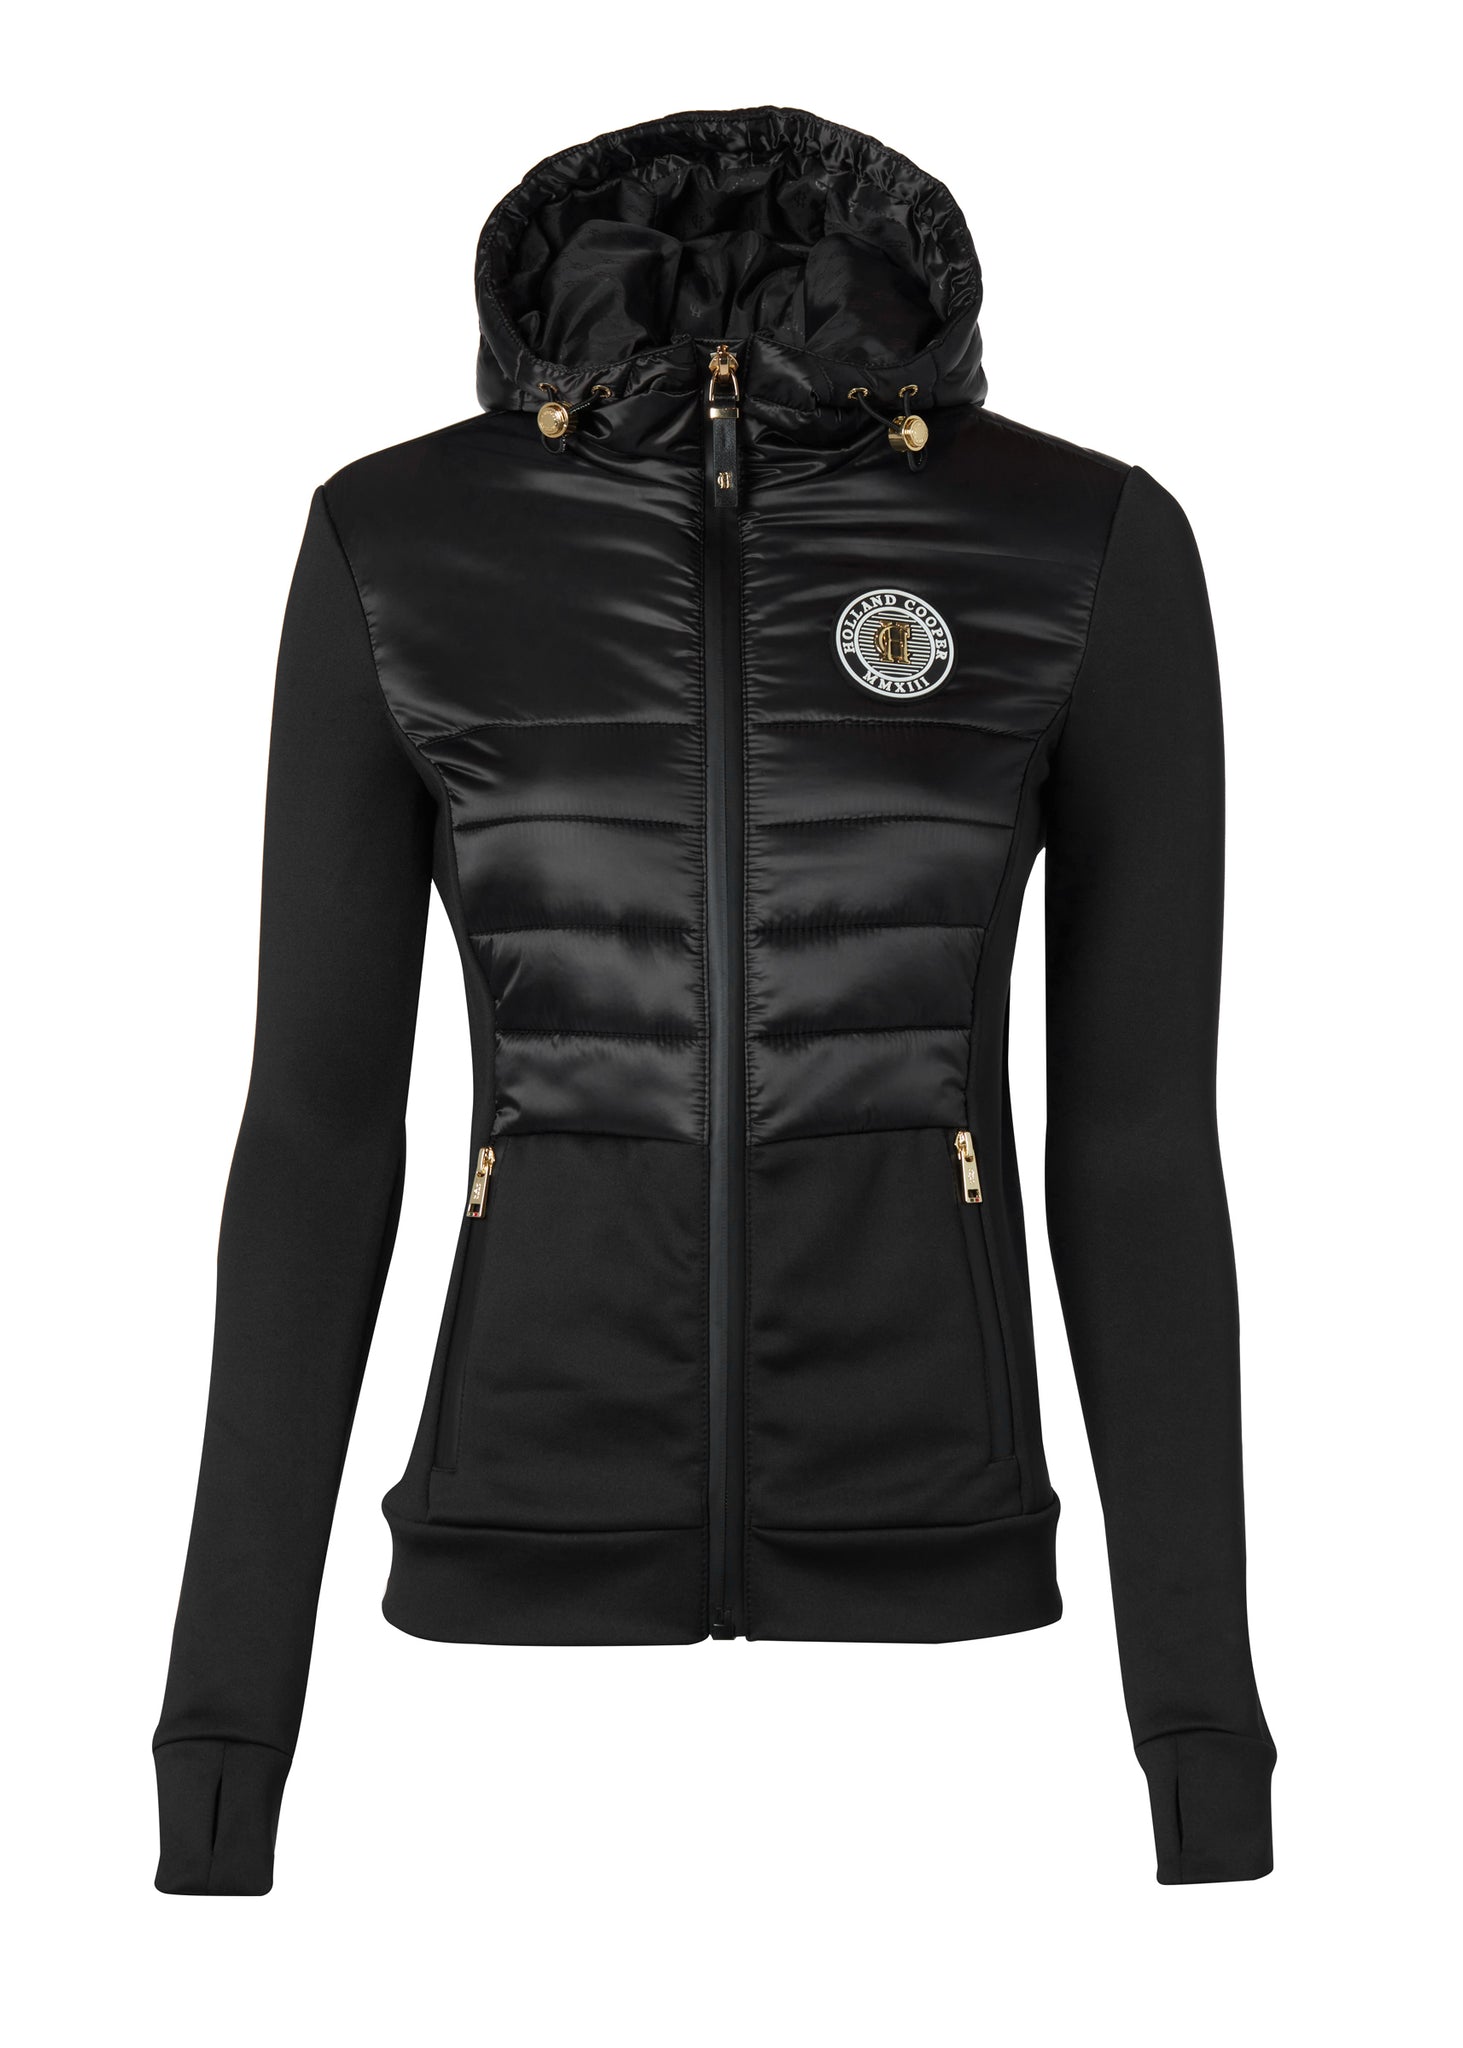 hooded hybrid jacket in black with jersey panels on the waist and sleeves and Sorona eco down fill on hood front and back body panels finished with rubbed zip fastening in black and two side pockets with the same zip fastenings